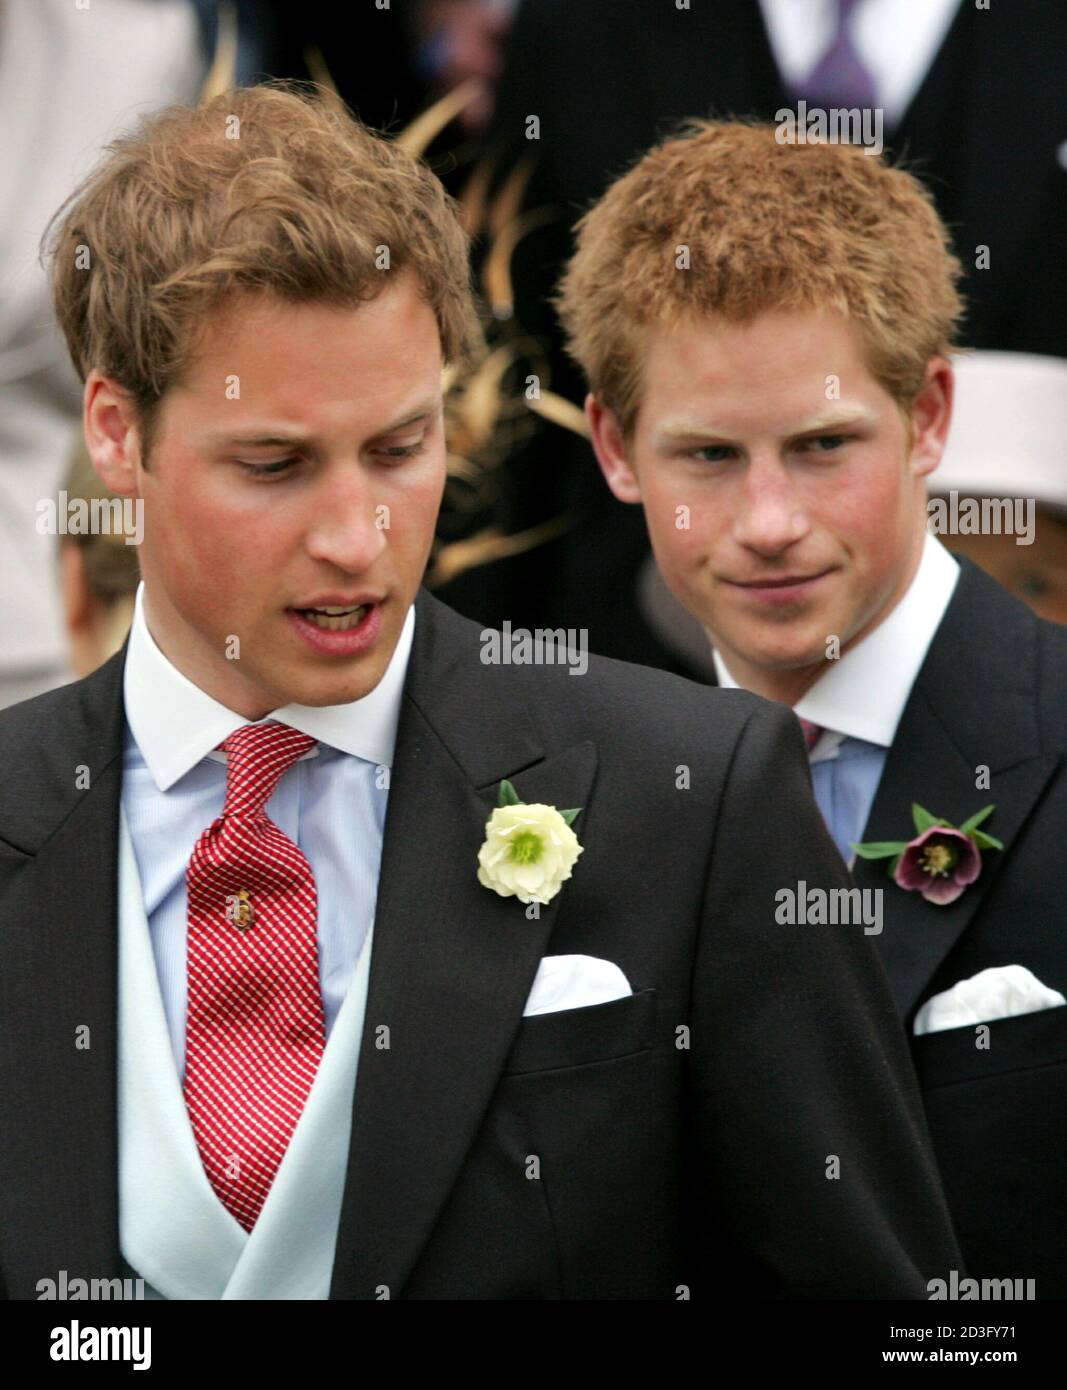 Prince William and Prince Harry arrive at the wedding of their father  [Britain's Prince Charles and Camilla Parker Bowles] in Windsor, southern  England, April 9, 2005.[ Prince Charles finally married the love